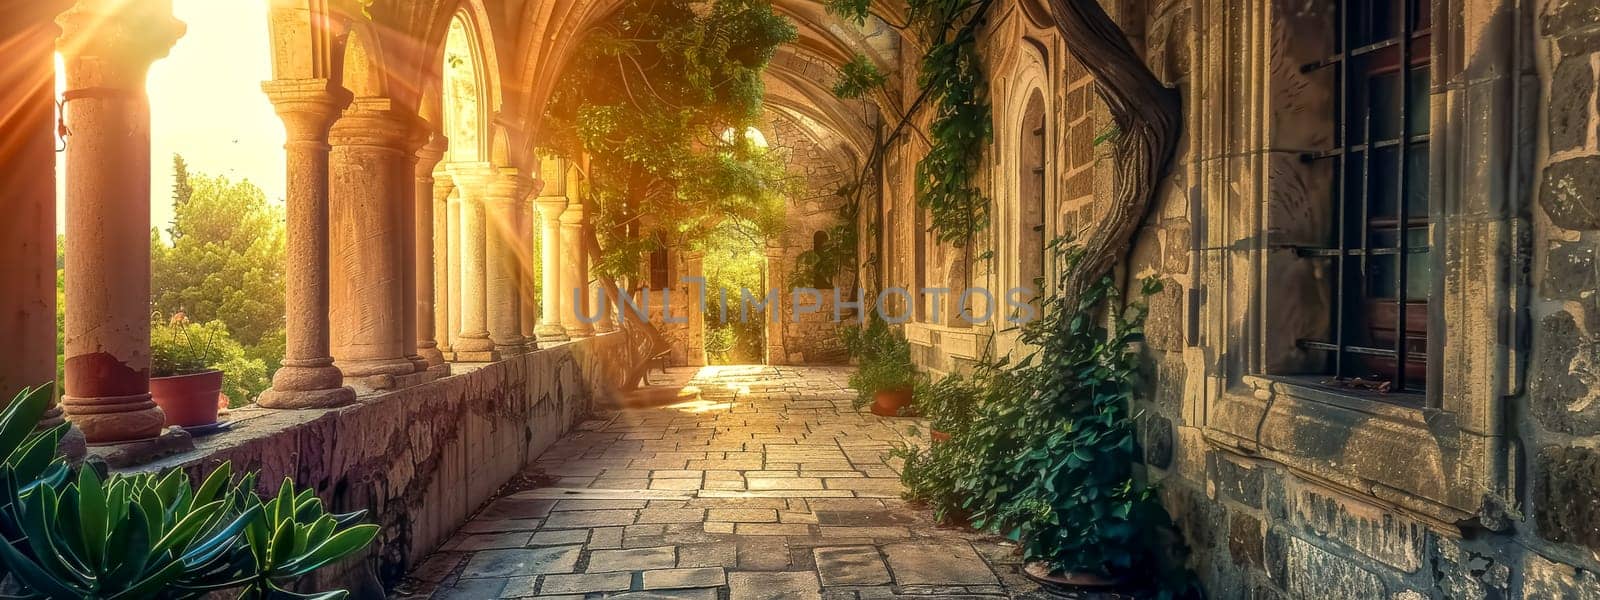 Serene scene of a sun-drenched cloister with antique architecture and lush greenery by Edophoto